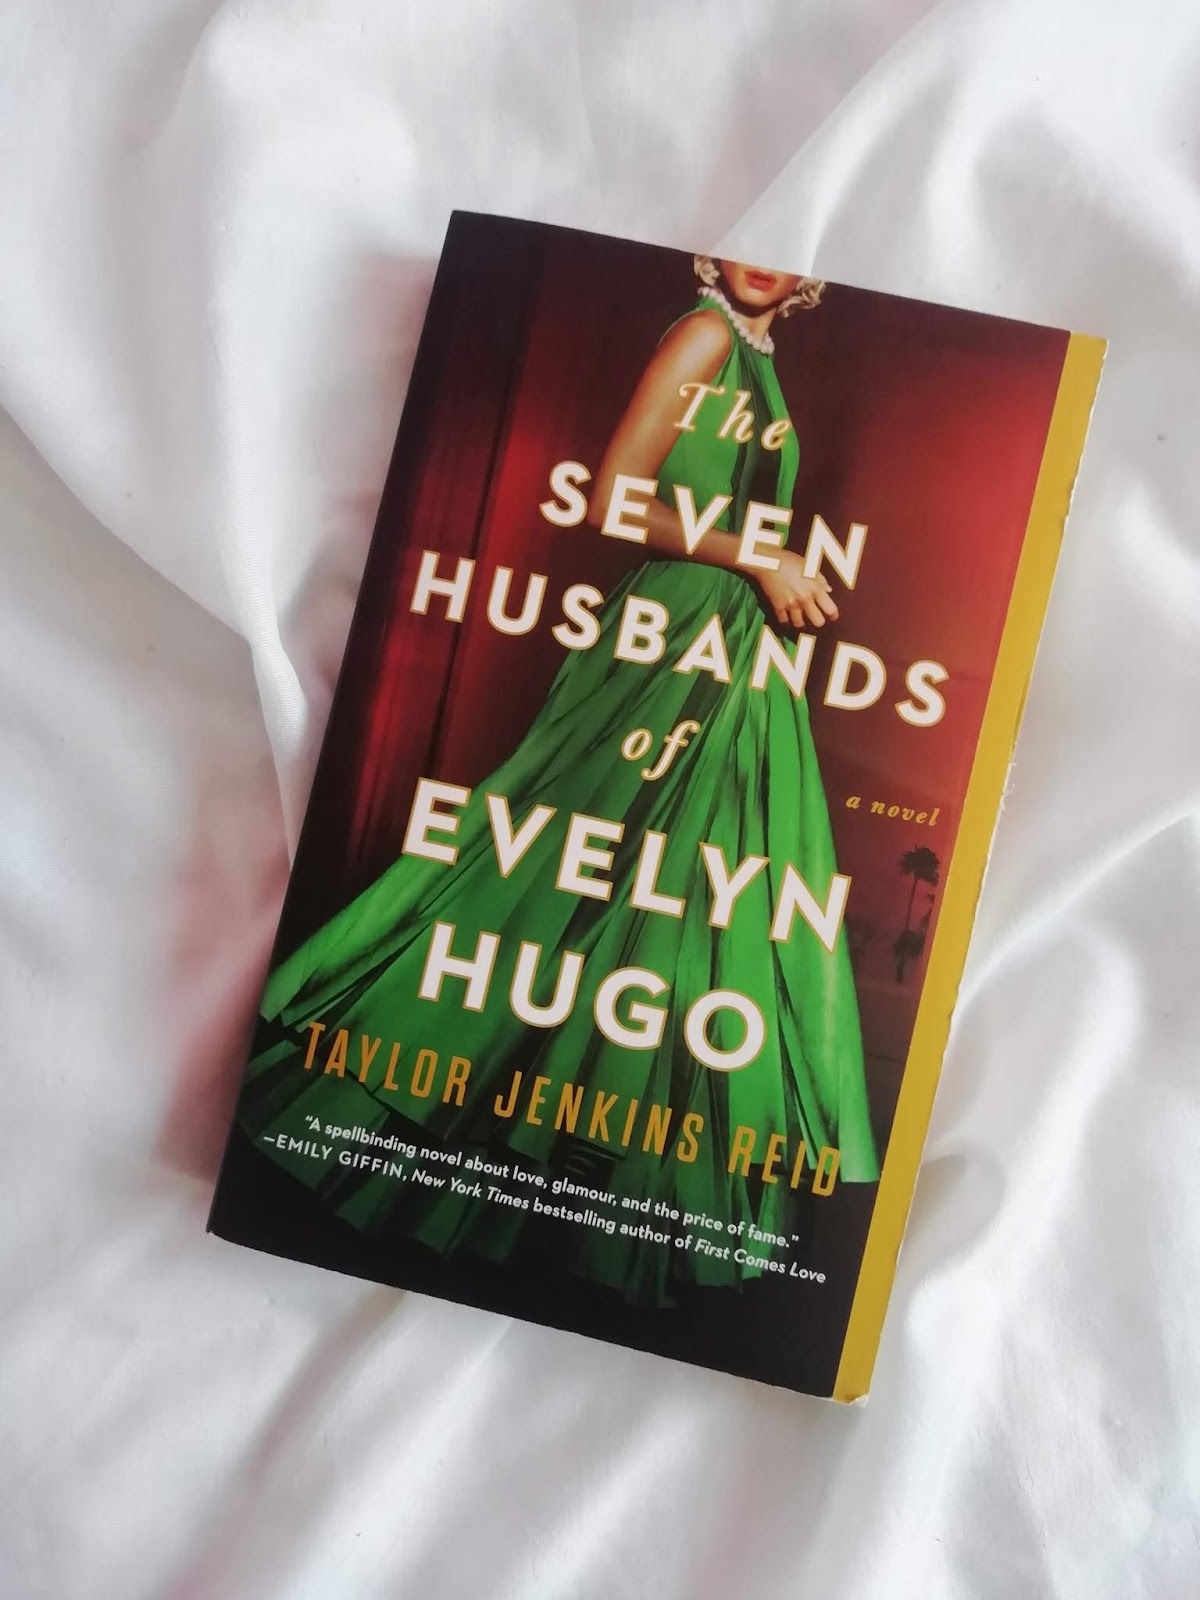 book review of the seven husbands of evelyn hugo